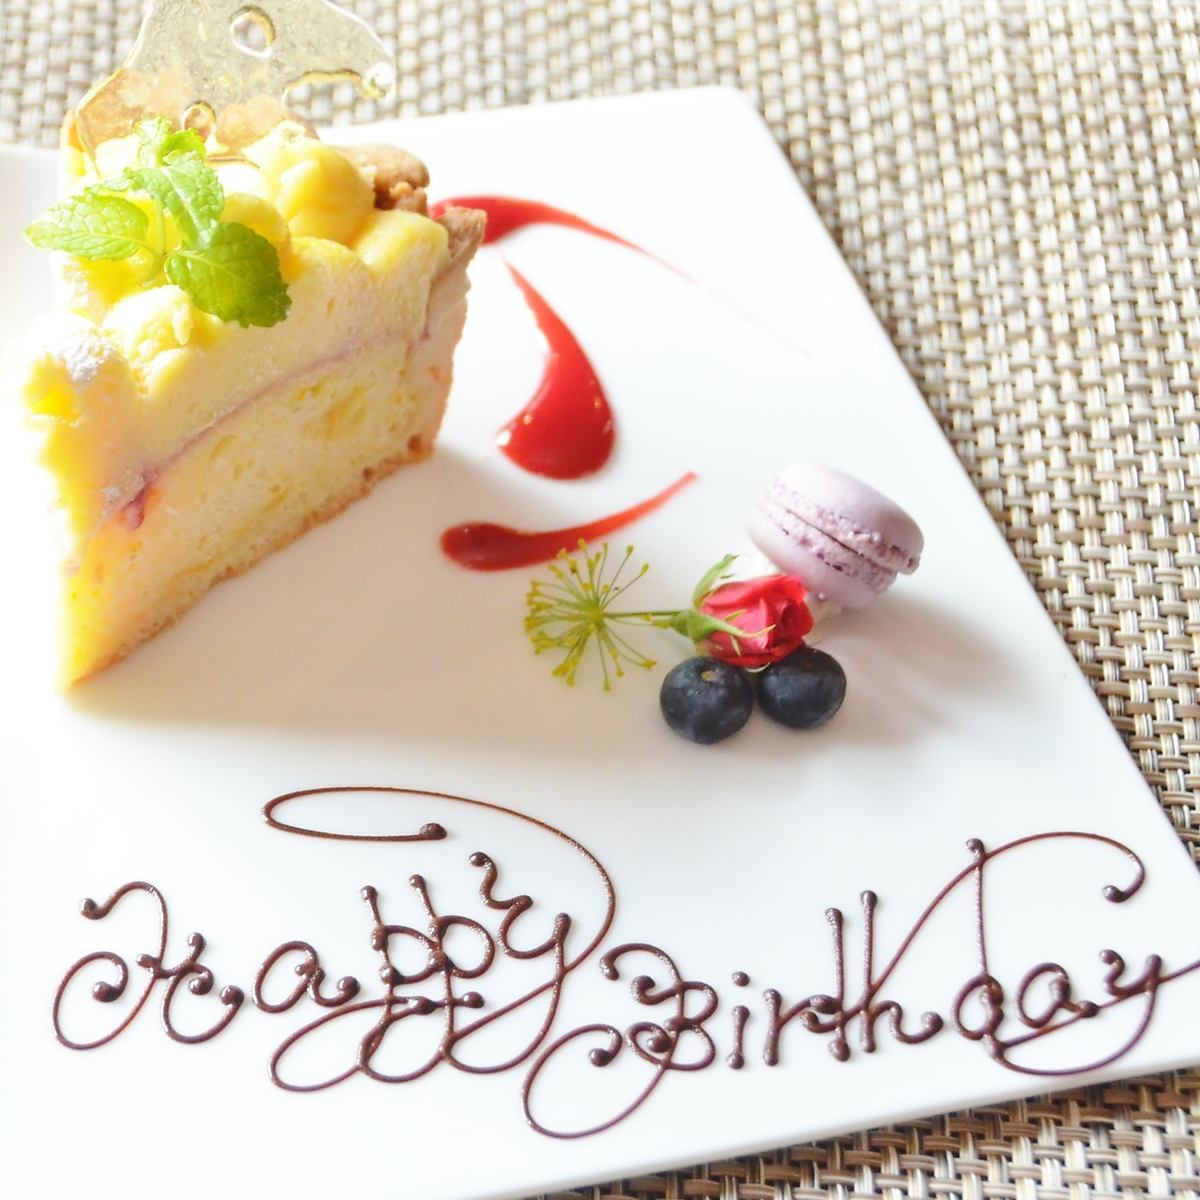 ♪ I will make a birthday · anniversary plate for free ♪